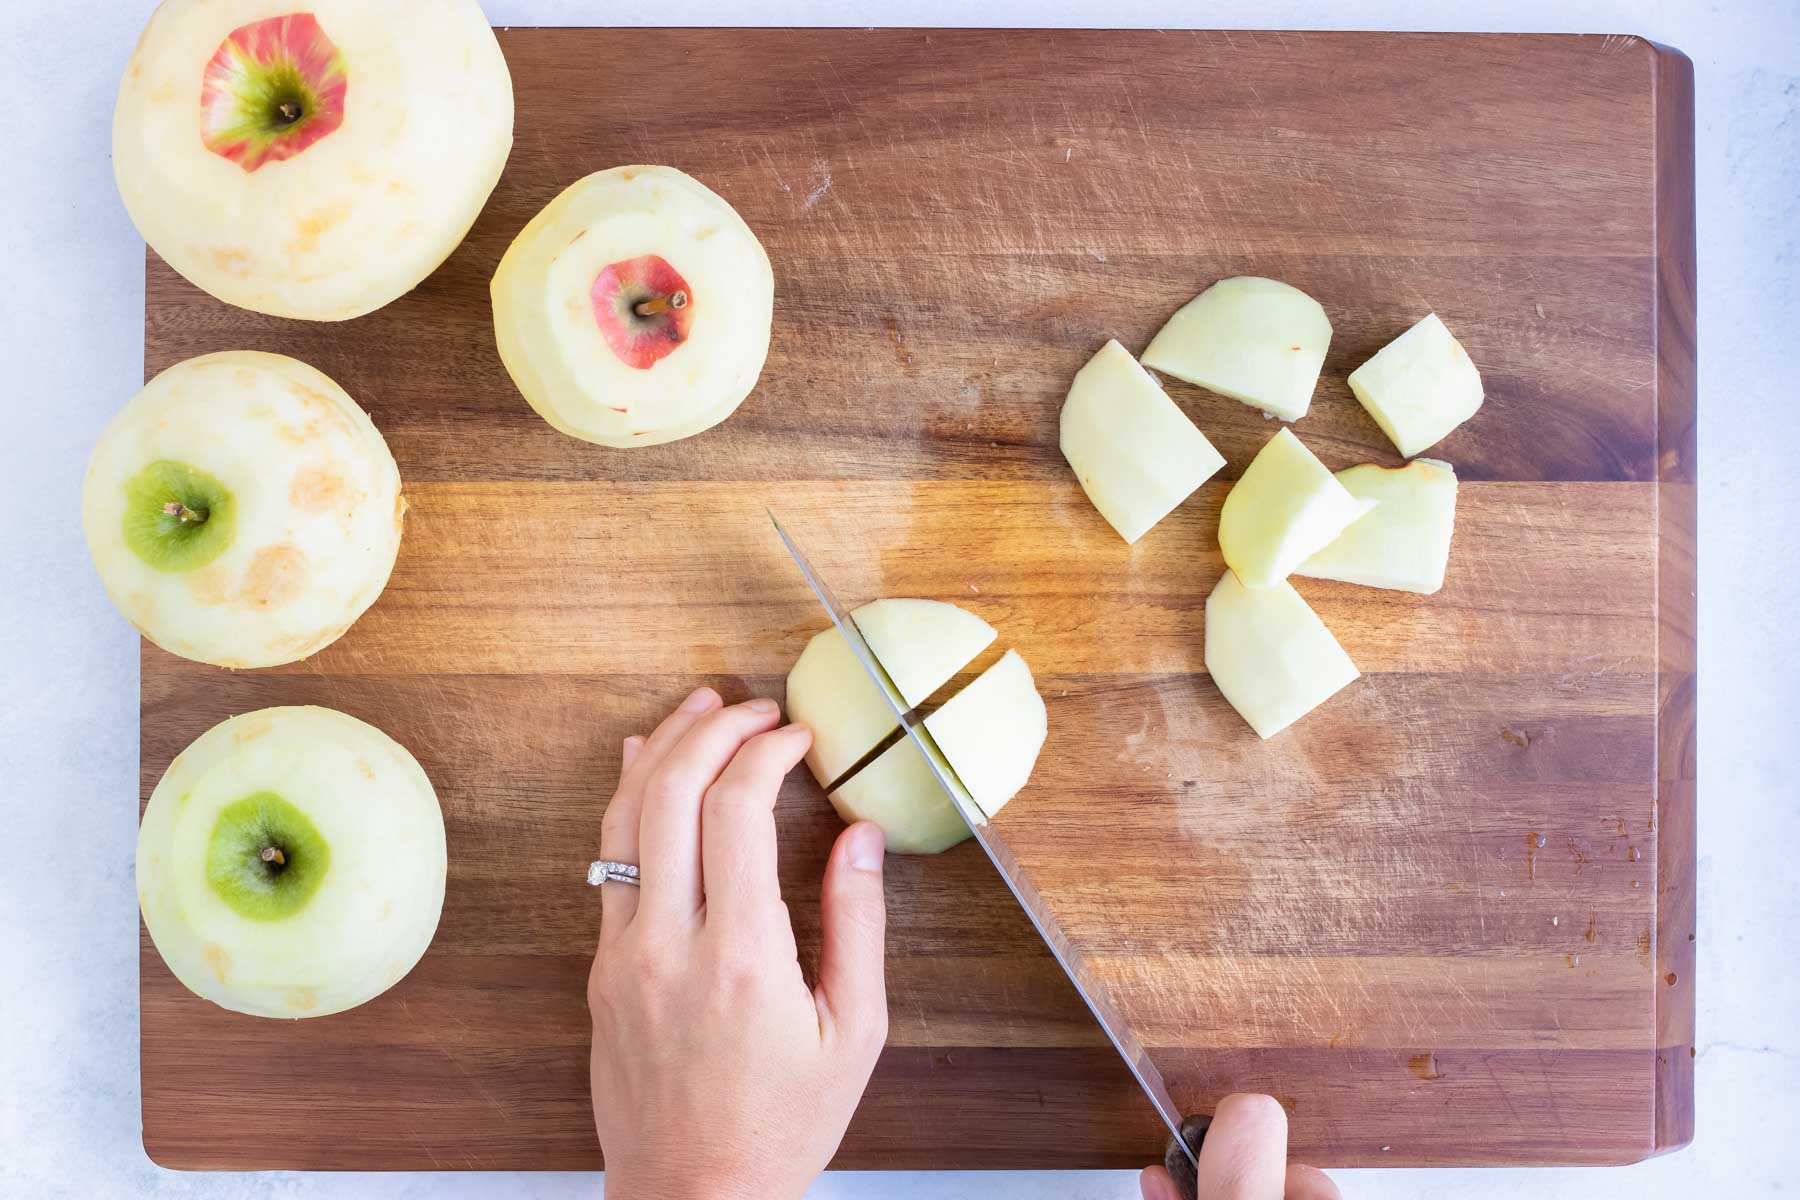 Cut the apple around the core to create large chunks for this quick and easy recipe.